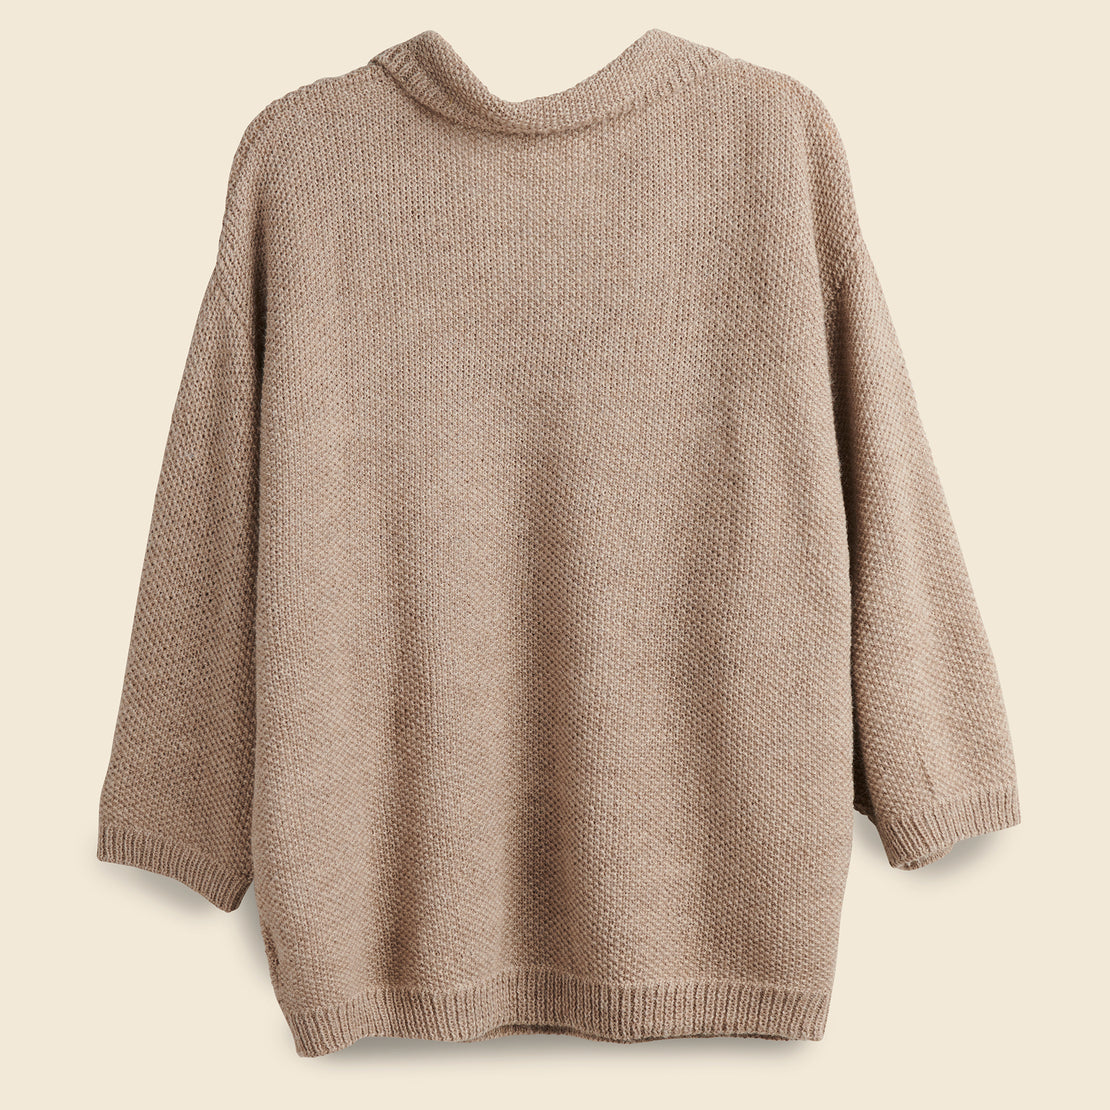 Dolman Henley Sweater - Oatmeal - First Rite - STAG Provisions - W - Tops - Sweater